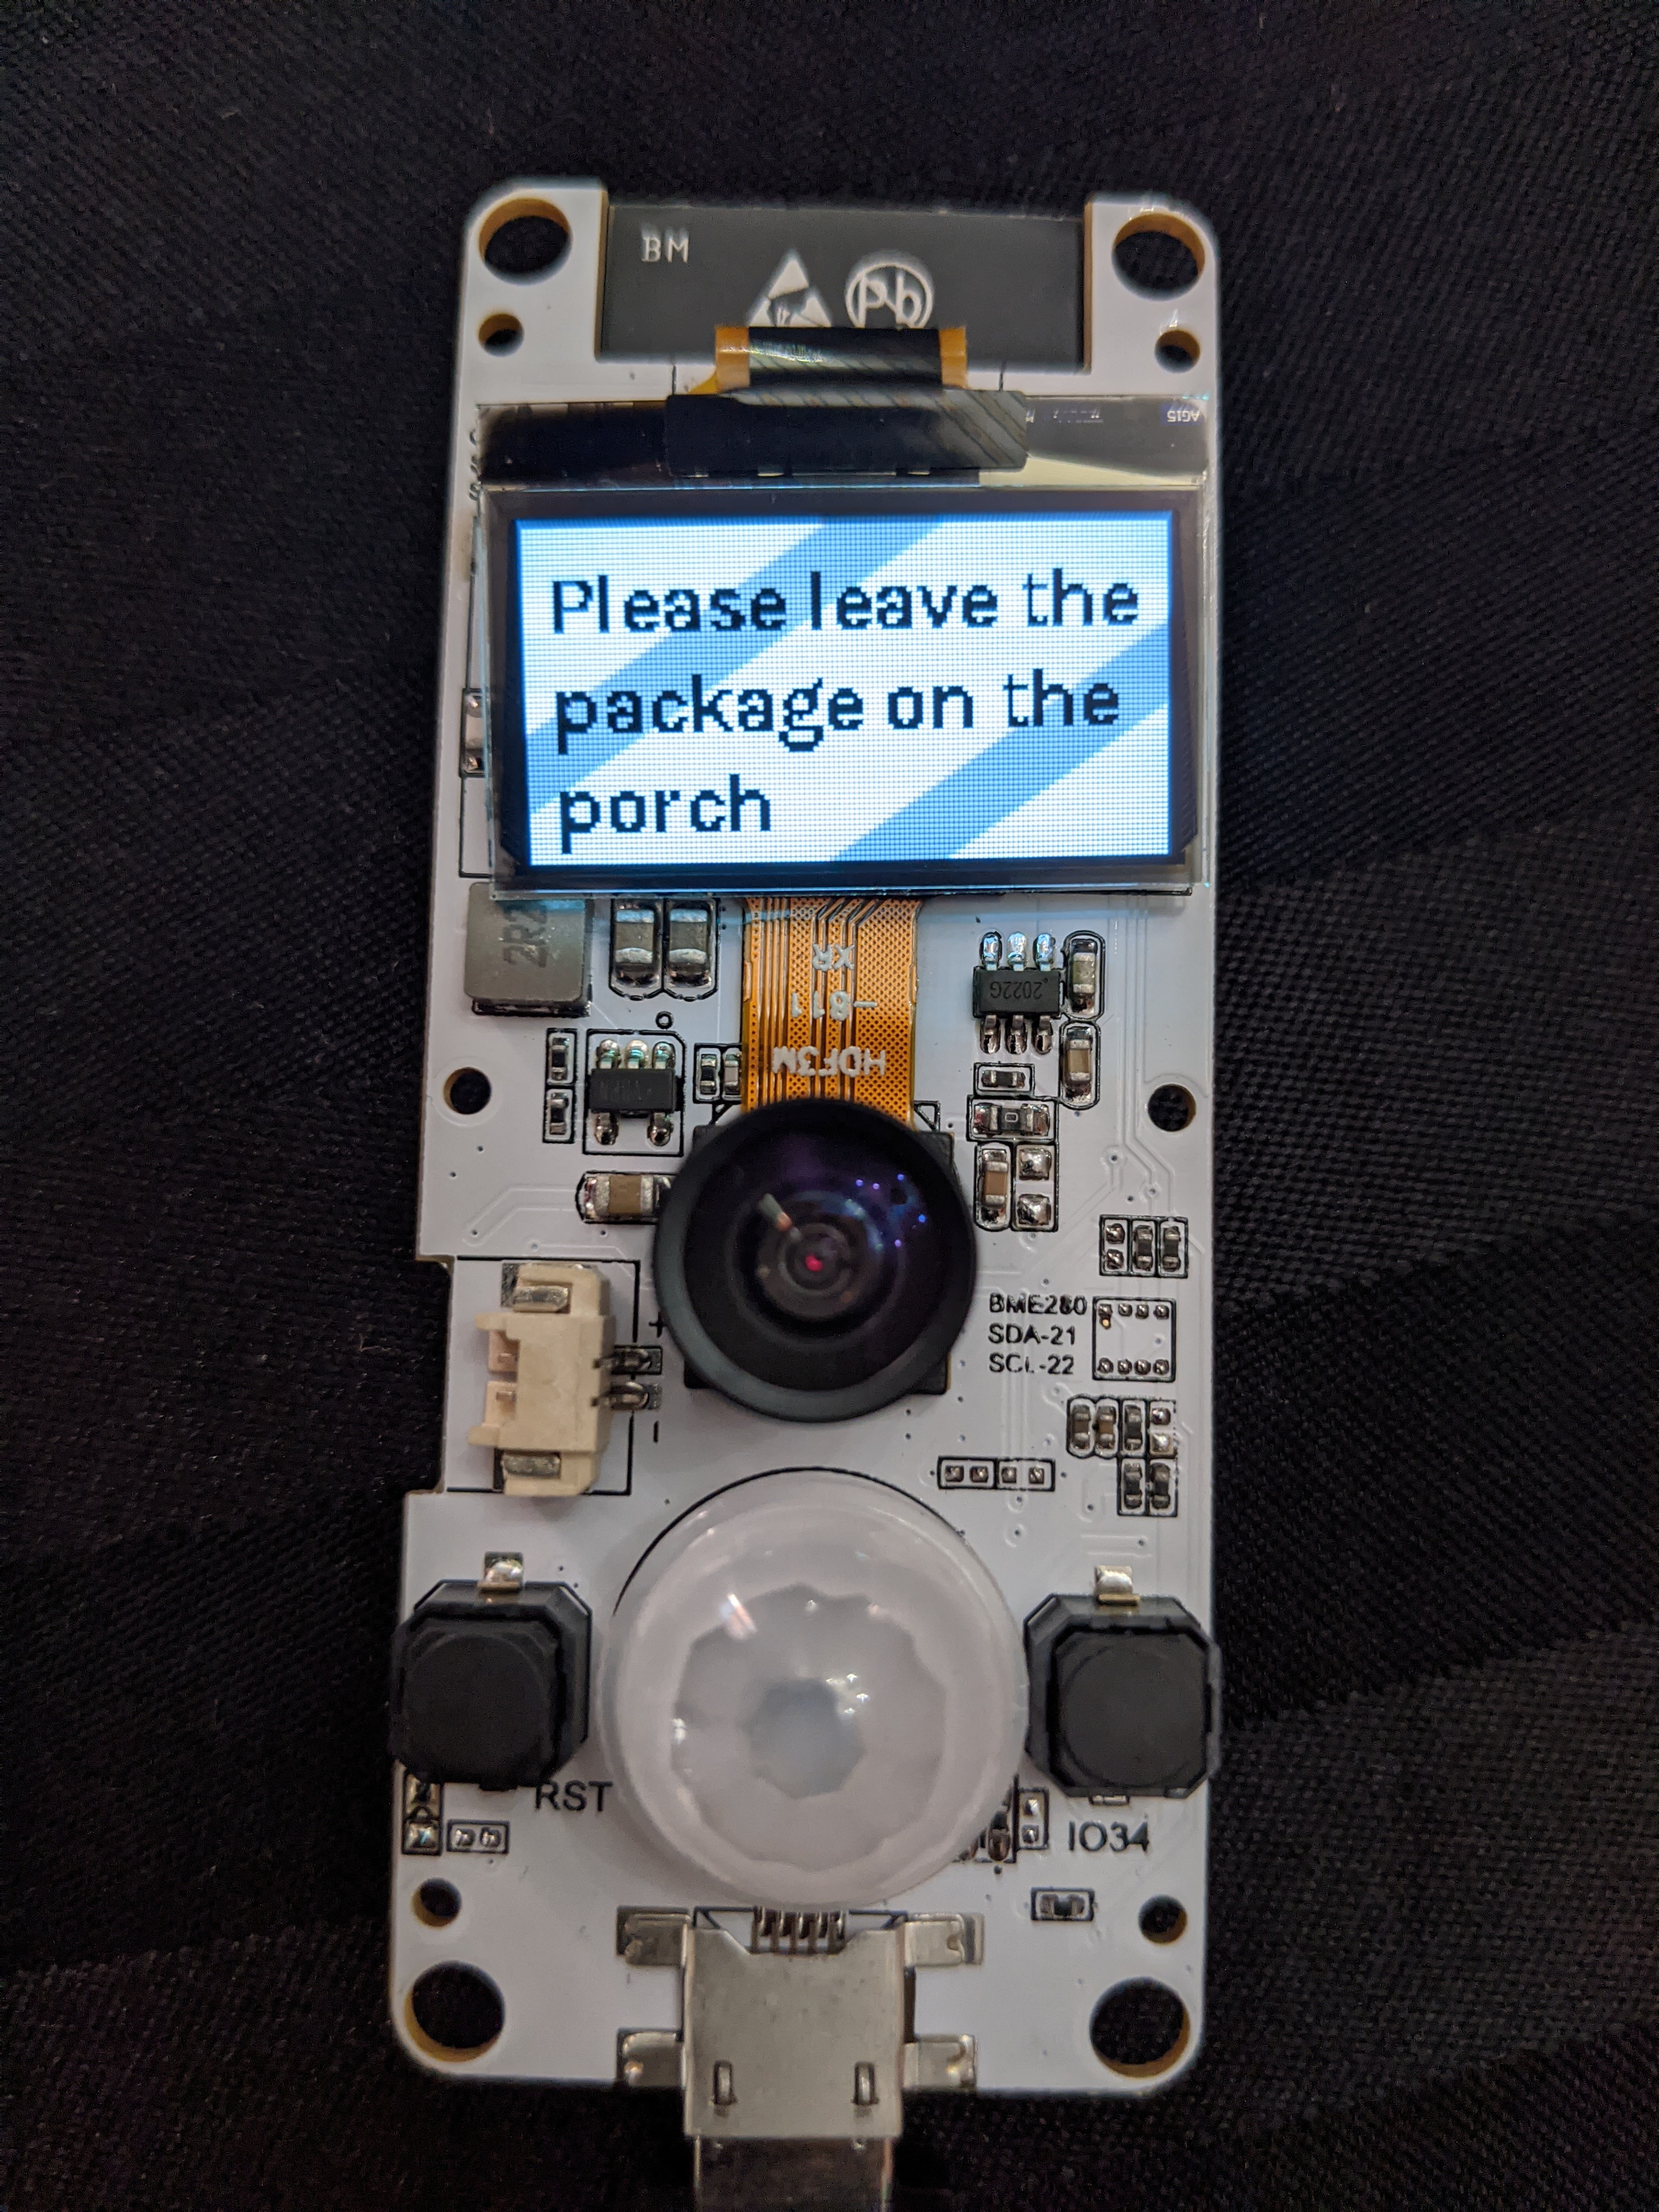 Doorbell displaying a user-rpovided message